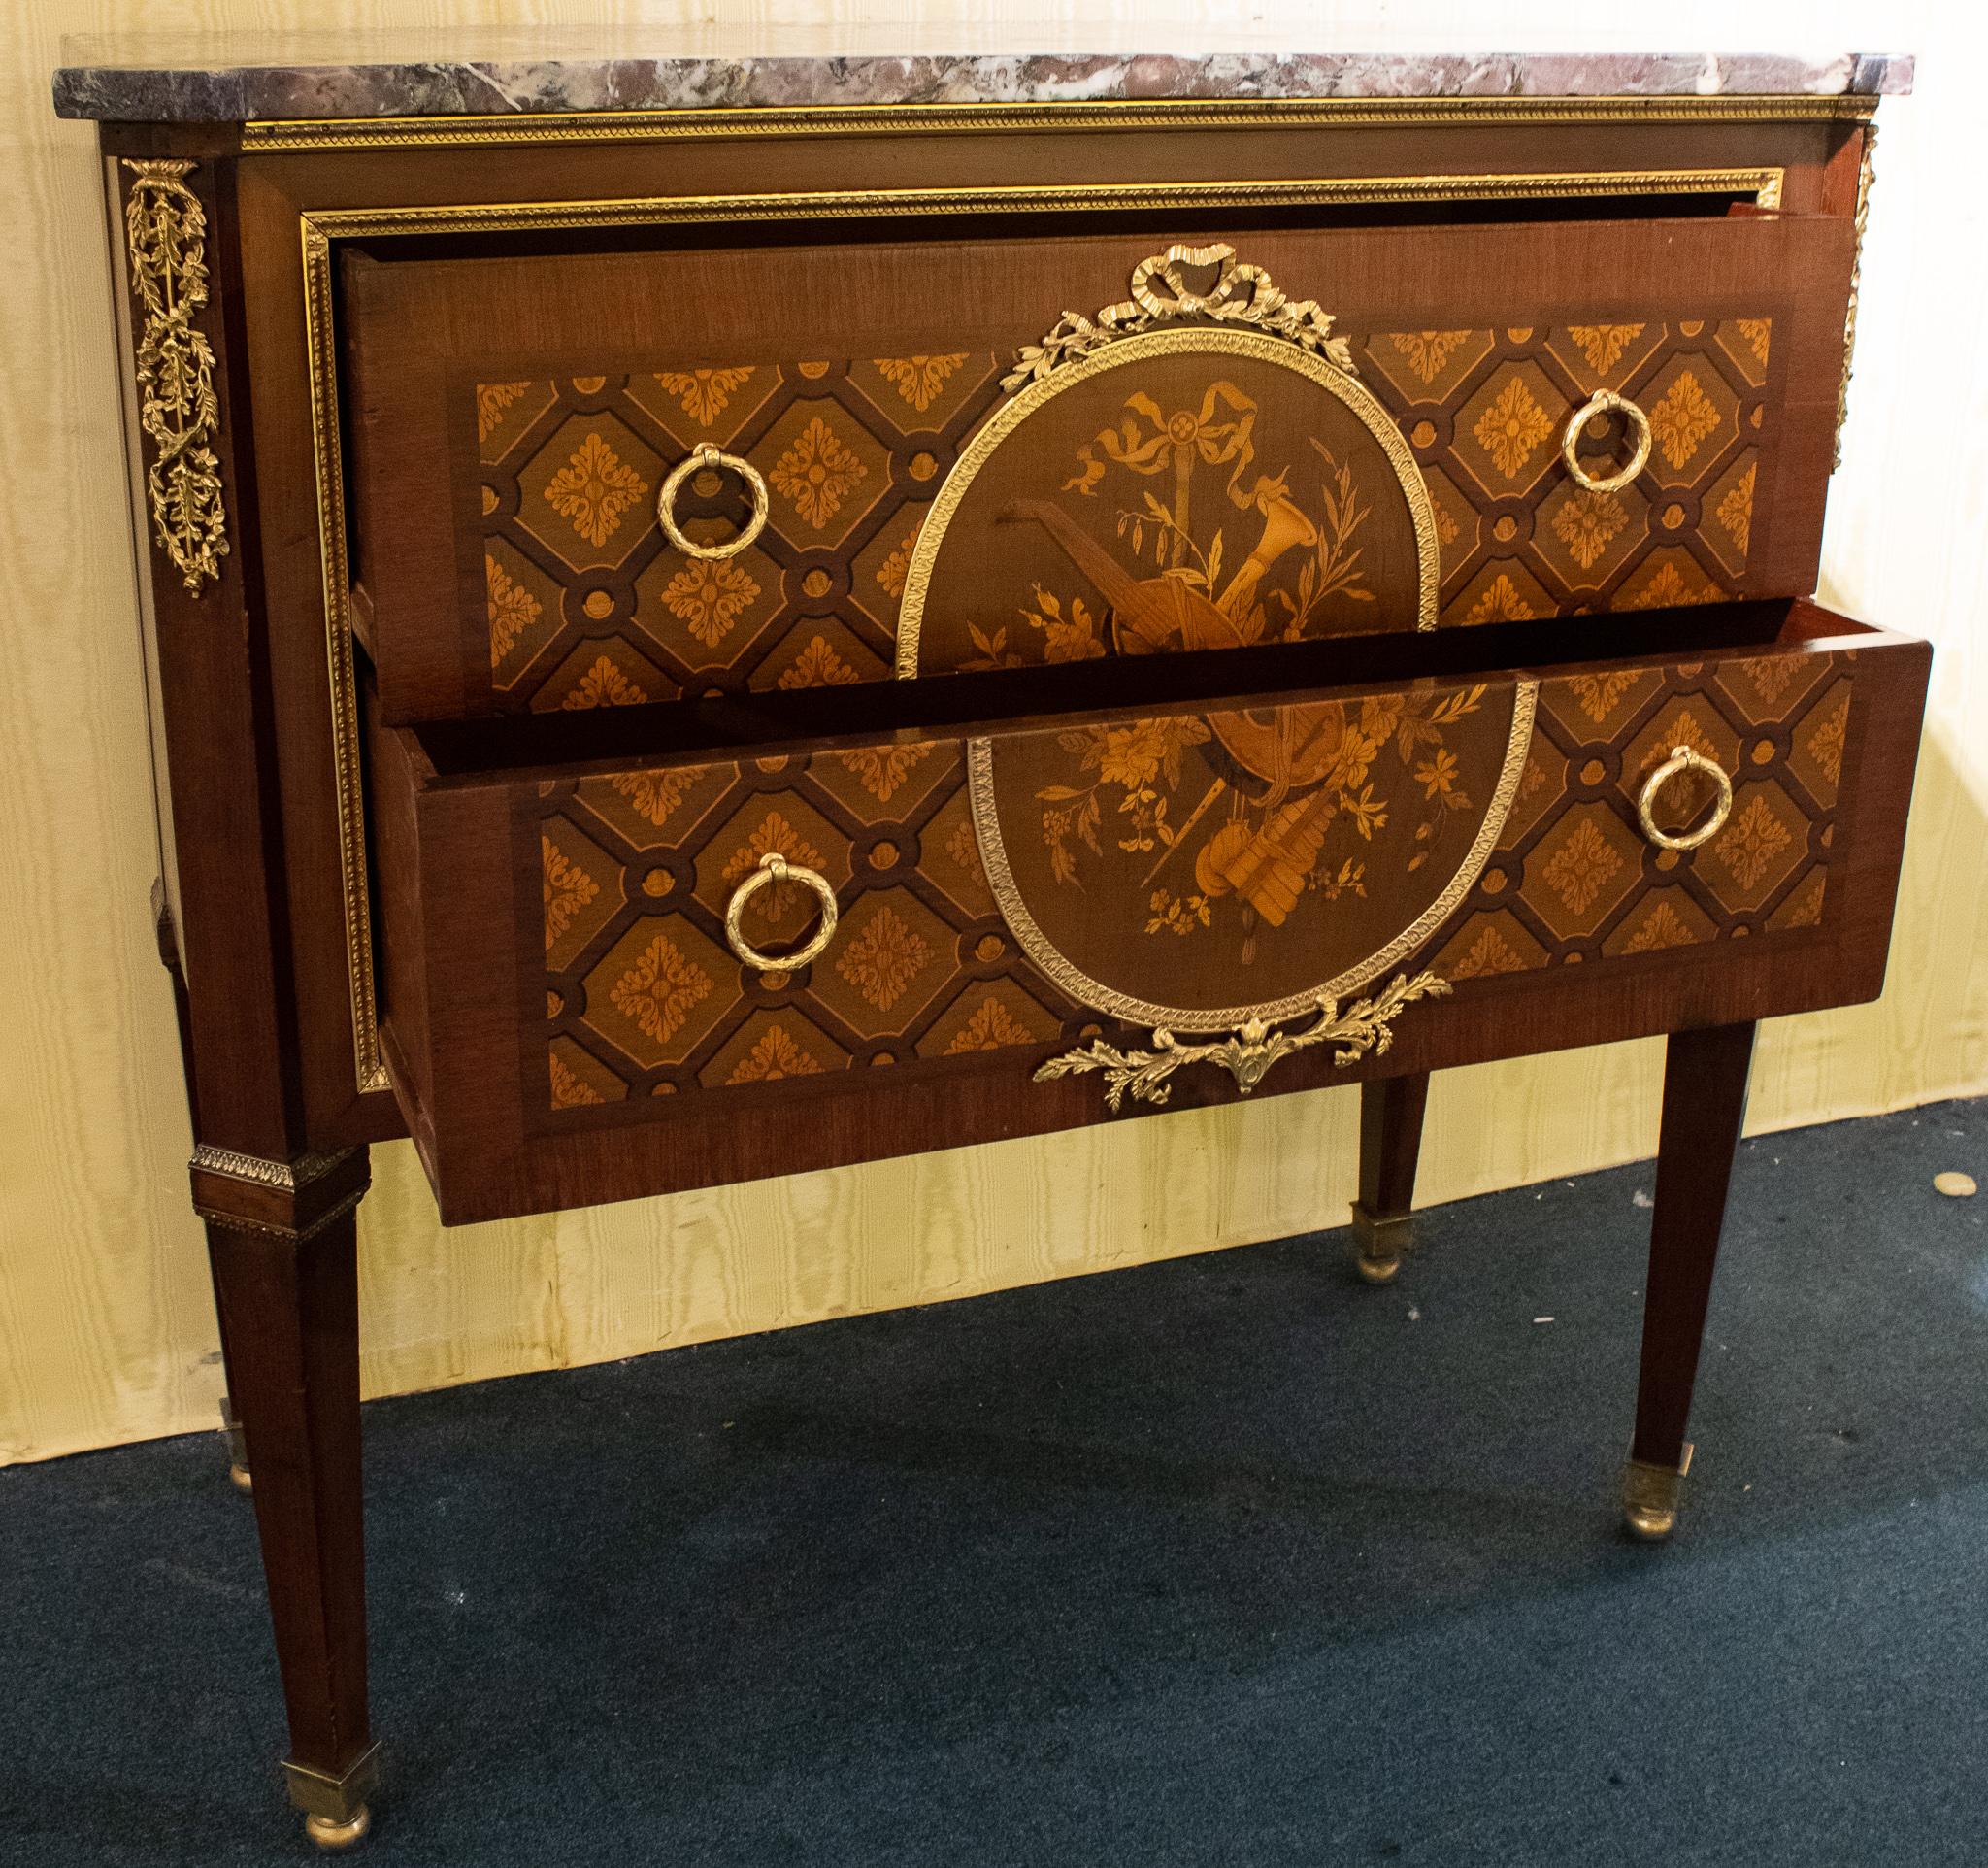 Late 19th Century French Louis XVI Style Marquetry Inlaid Marble-Top Commode For Sale